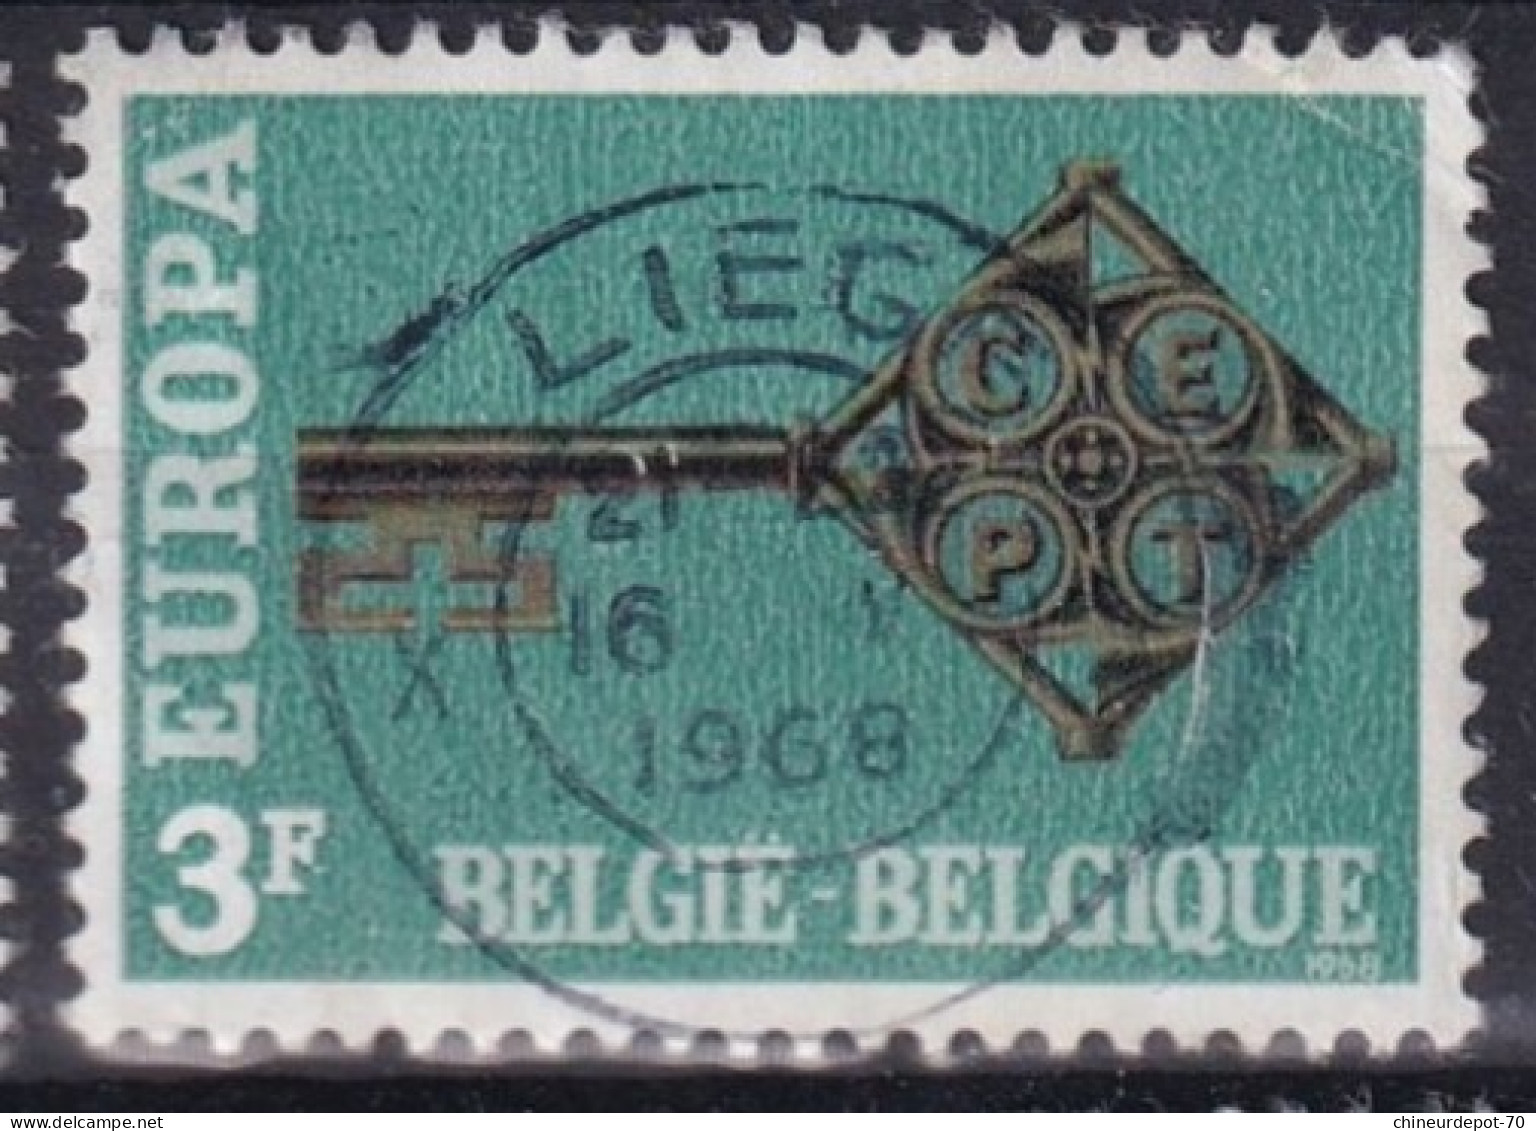 CLES EUROPA LIEGE - Used Stamps